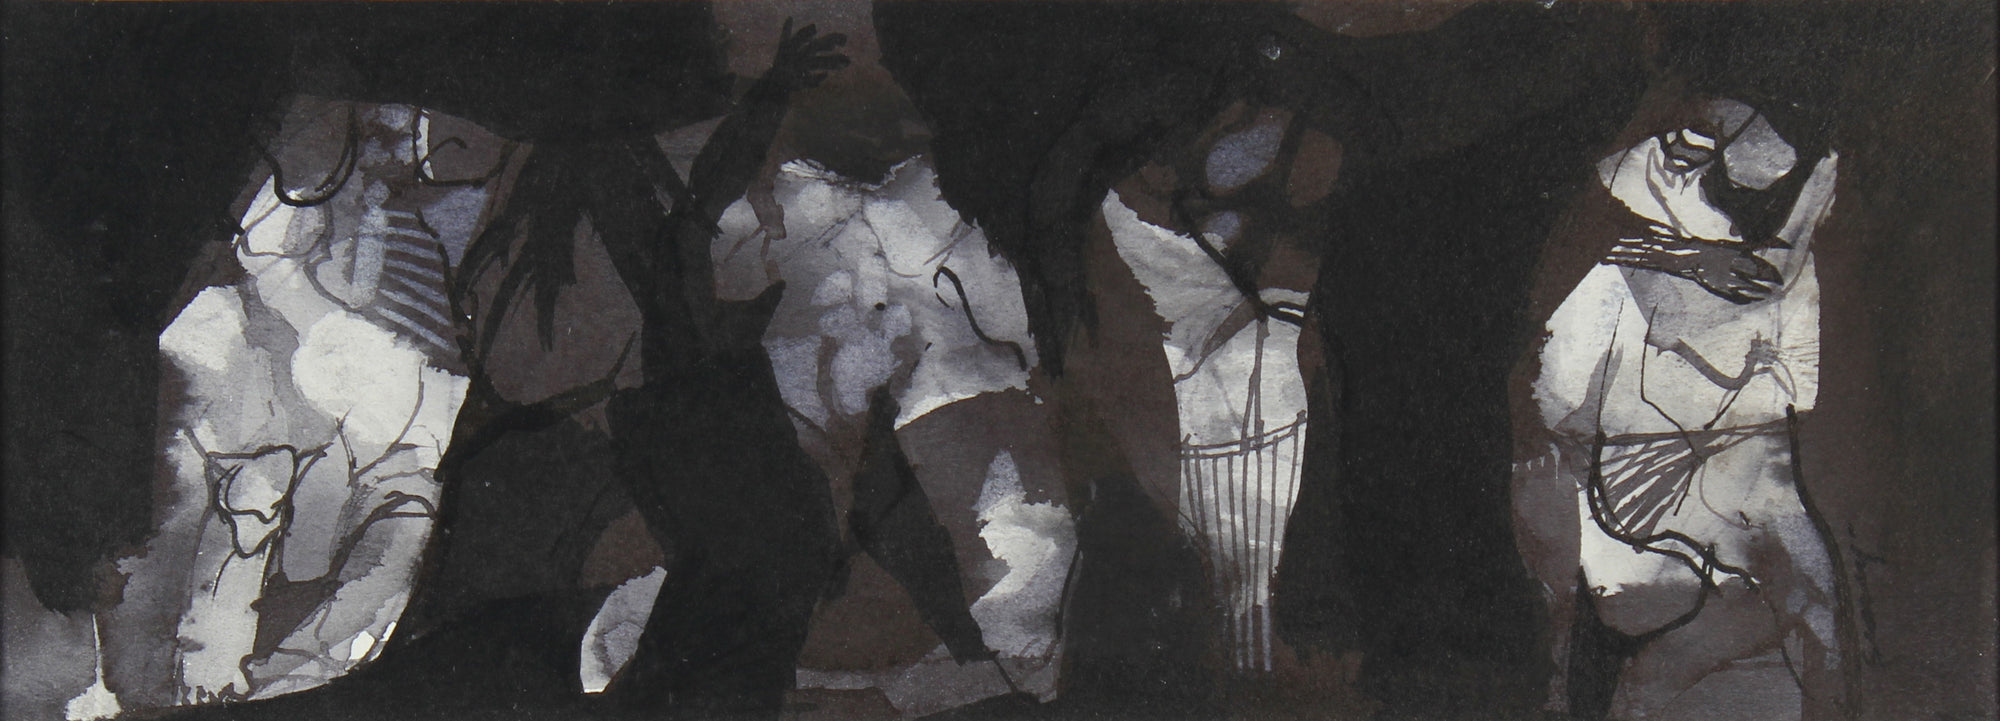 <i>Figures in the Flood</i><br>Mixed Media, 1965<br><br>#0415